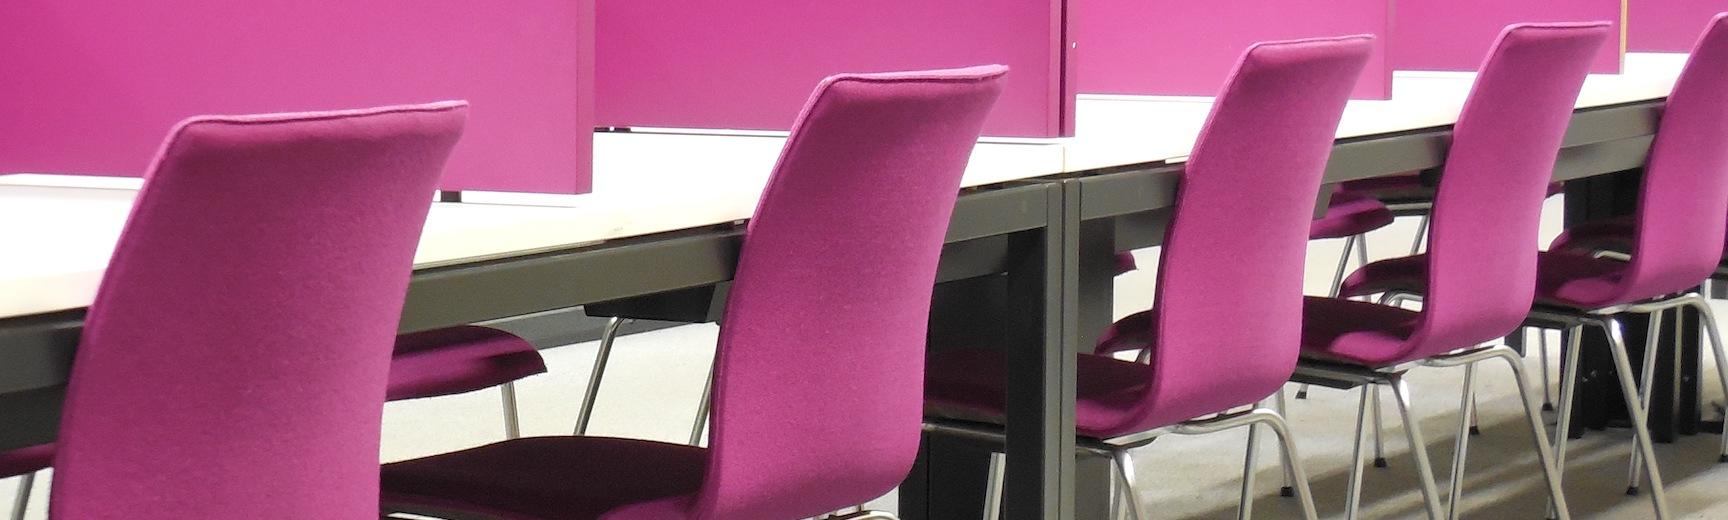 Pink chairs at tables separated by dividers